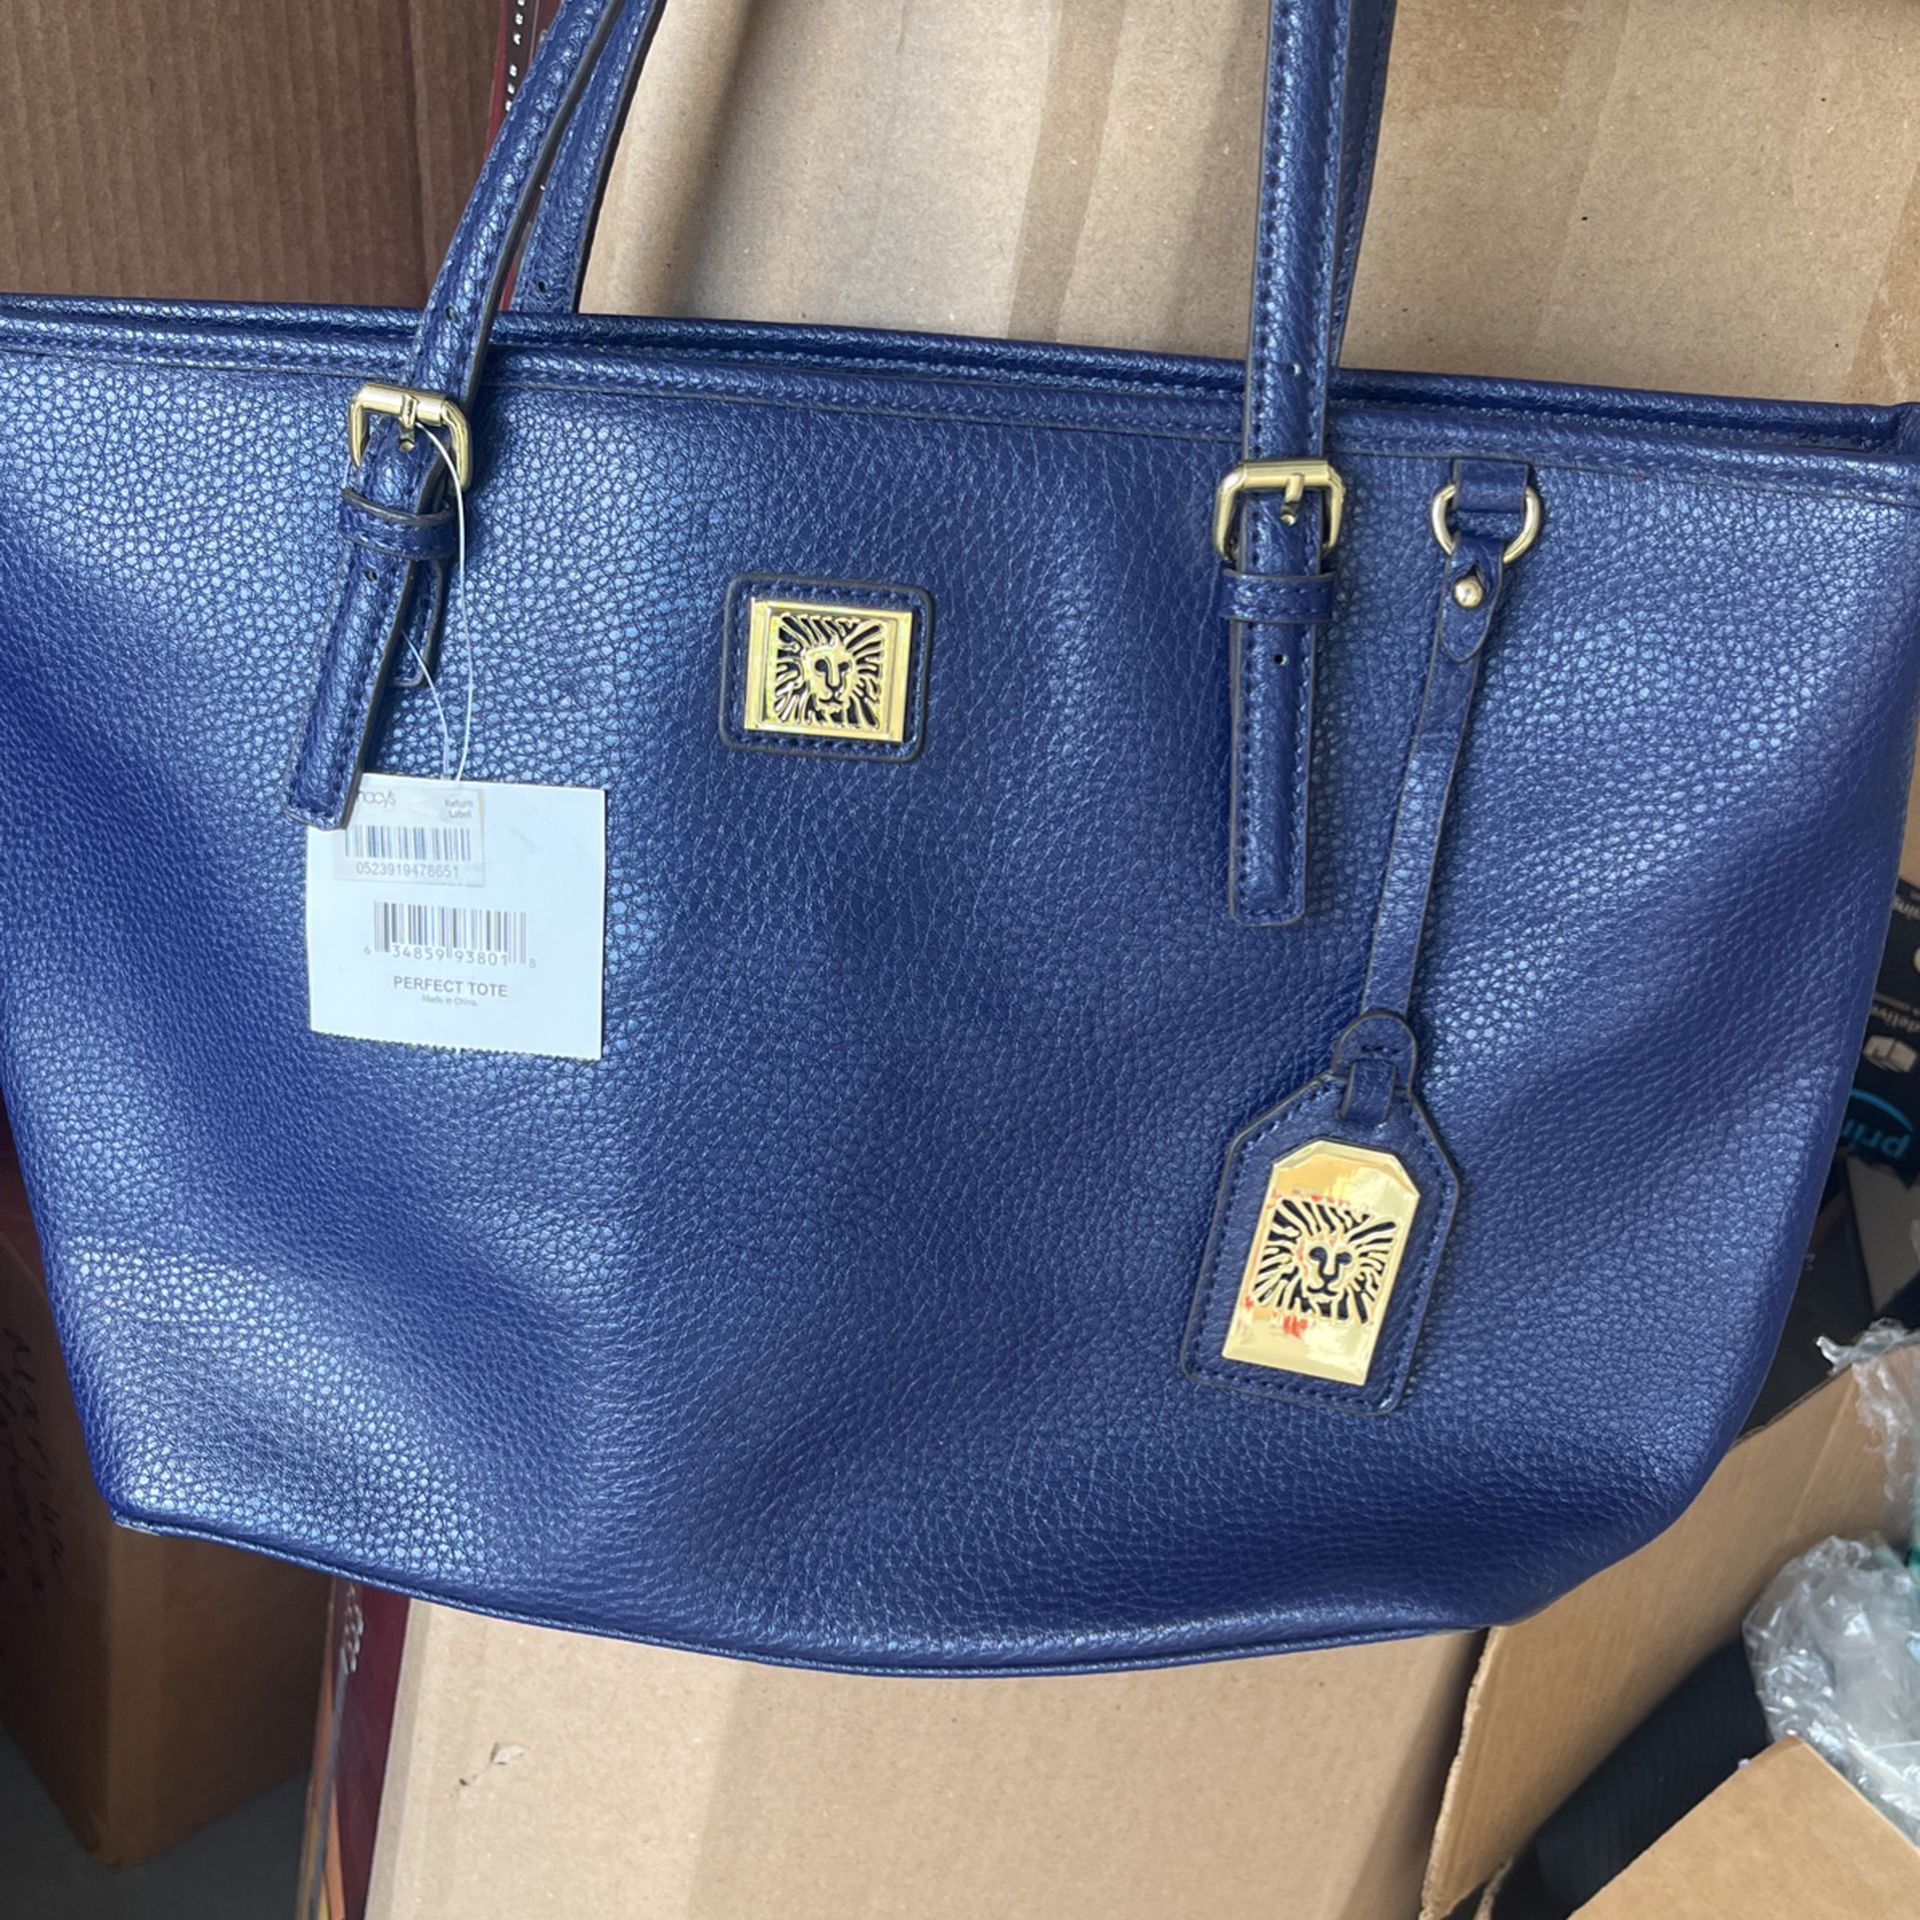 Ladies Brand New Hand Bag . for Sale in Las Vegas, NV - OfferUp